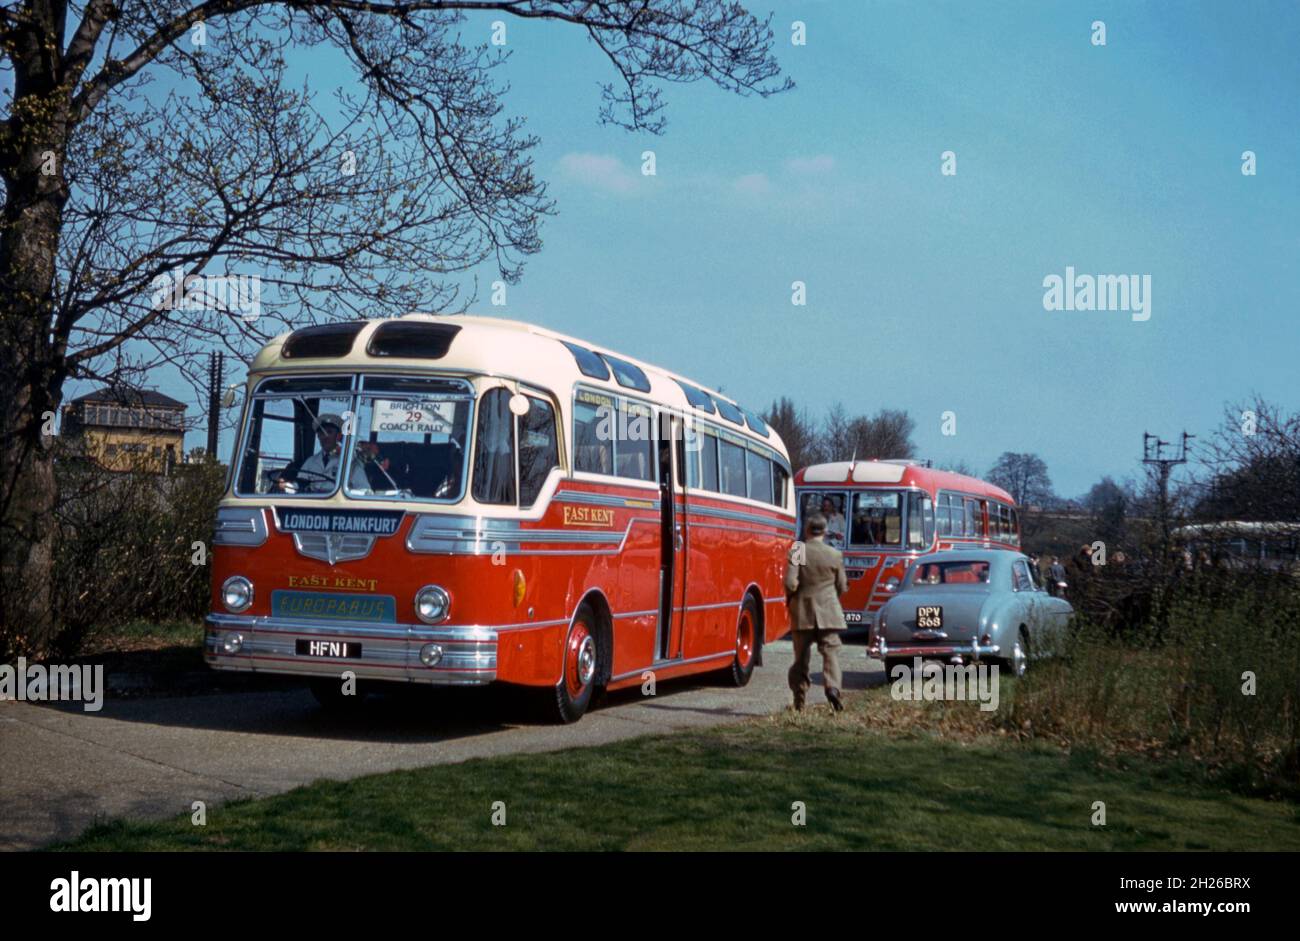 A coach of The East Kent Road Car Company on its way to a bus rally in Brighton, East Sussex, England, UK in 1956. The vehicle is a Duple bodied Leyland Royal Tiger registered HFN 1. The destination boards indicate that the coach was used on the company’s continental routes to Frankfurt, Germany that began in the 1950s. A ‘Europabus’ plate is visible on the front. The company operated ‘Europabus’ connections between London and Dover Dock for onward coach travel from Ostend. The East Kent Road Car Company Ltd formed in 1916 and based in Canterbury, Kent – a vintage 1950s photograph. Stock Photo